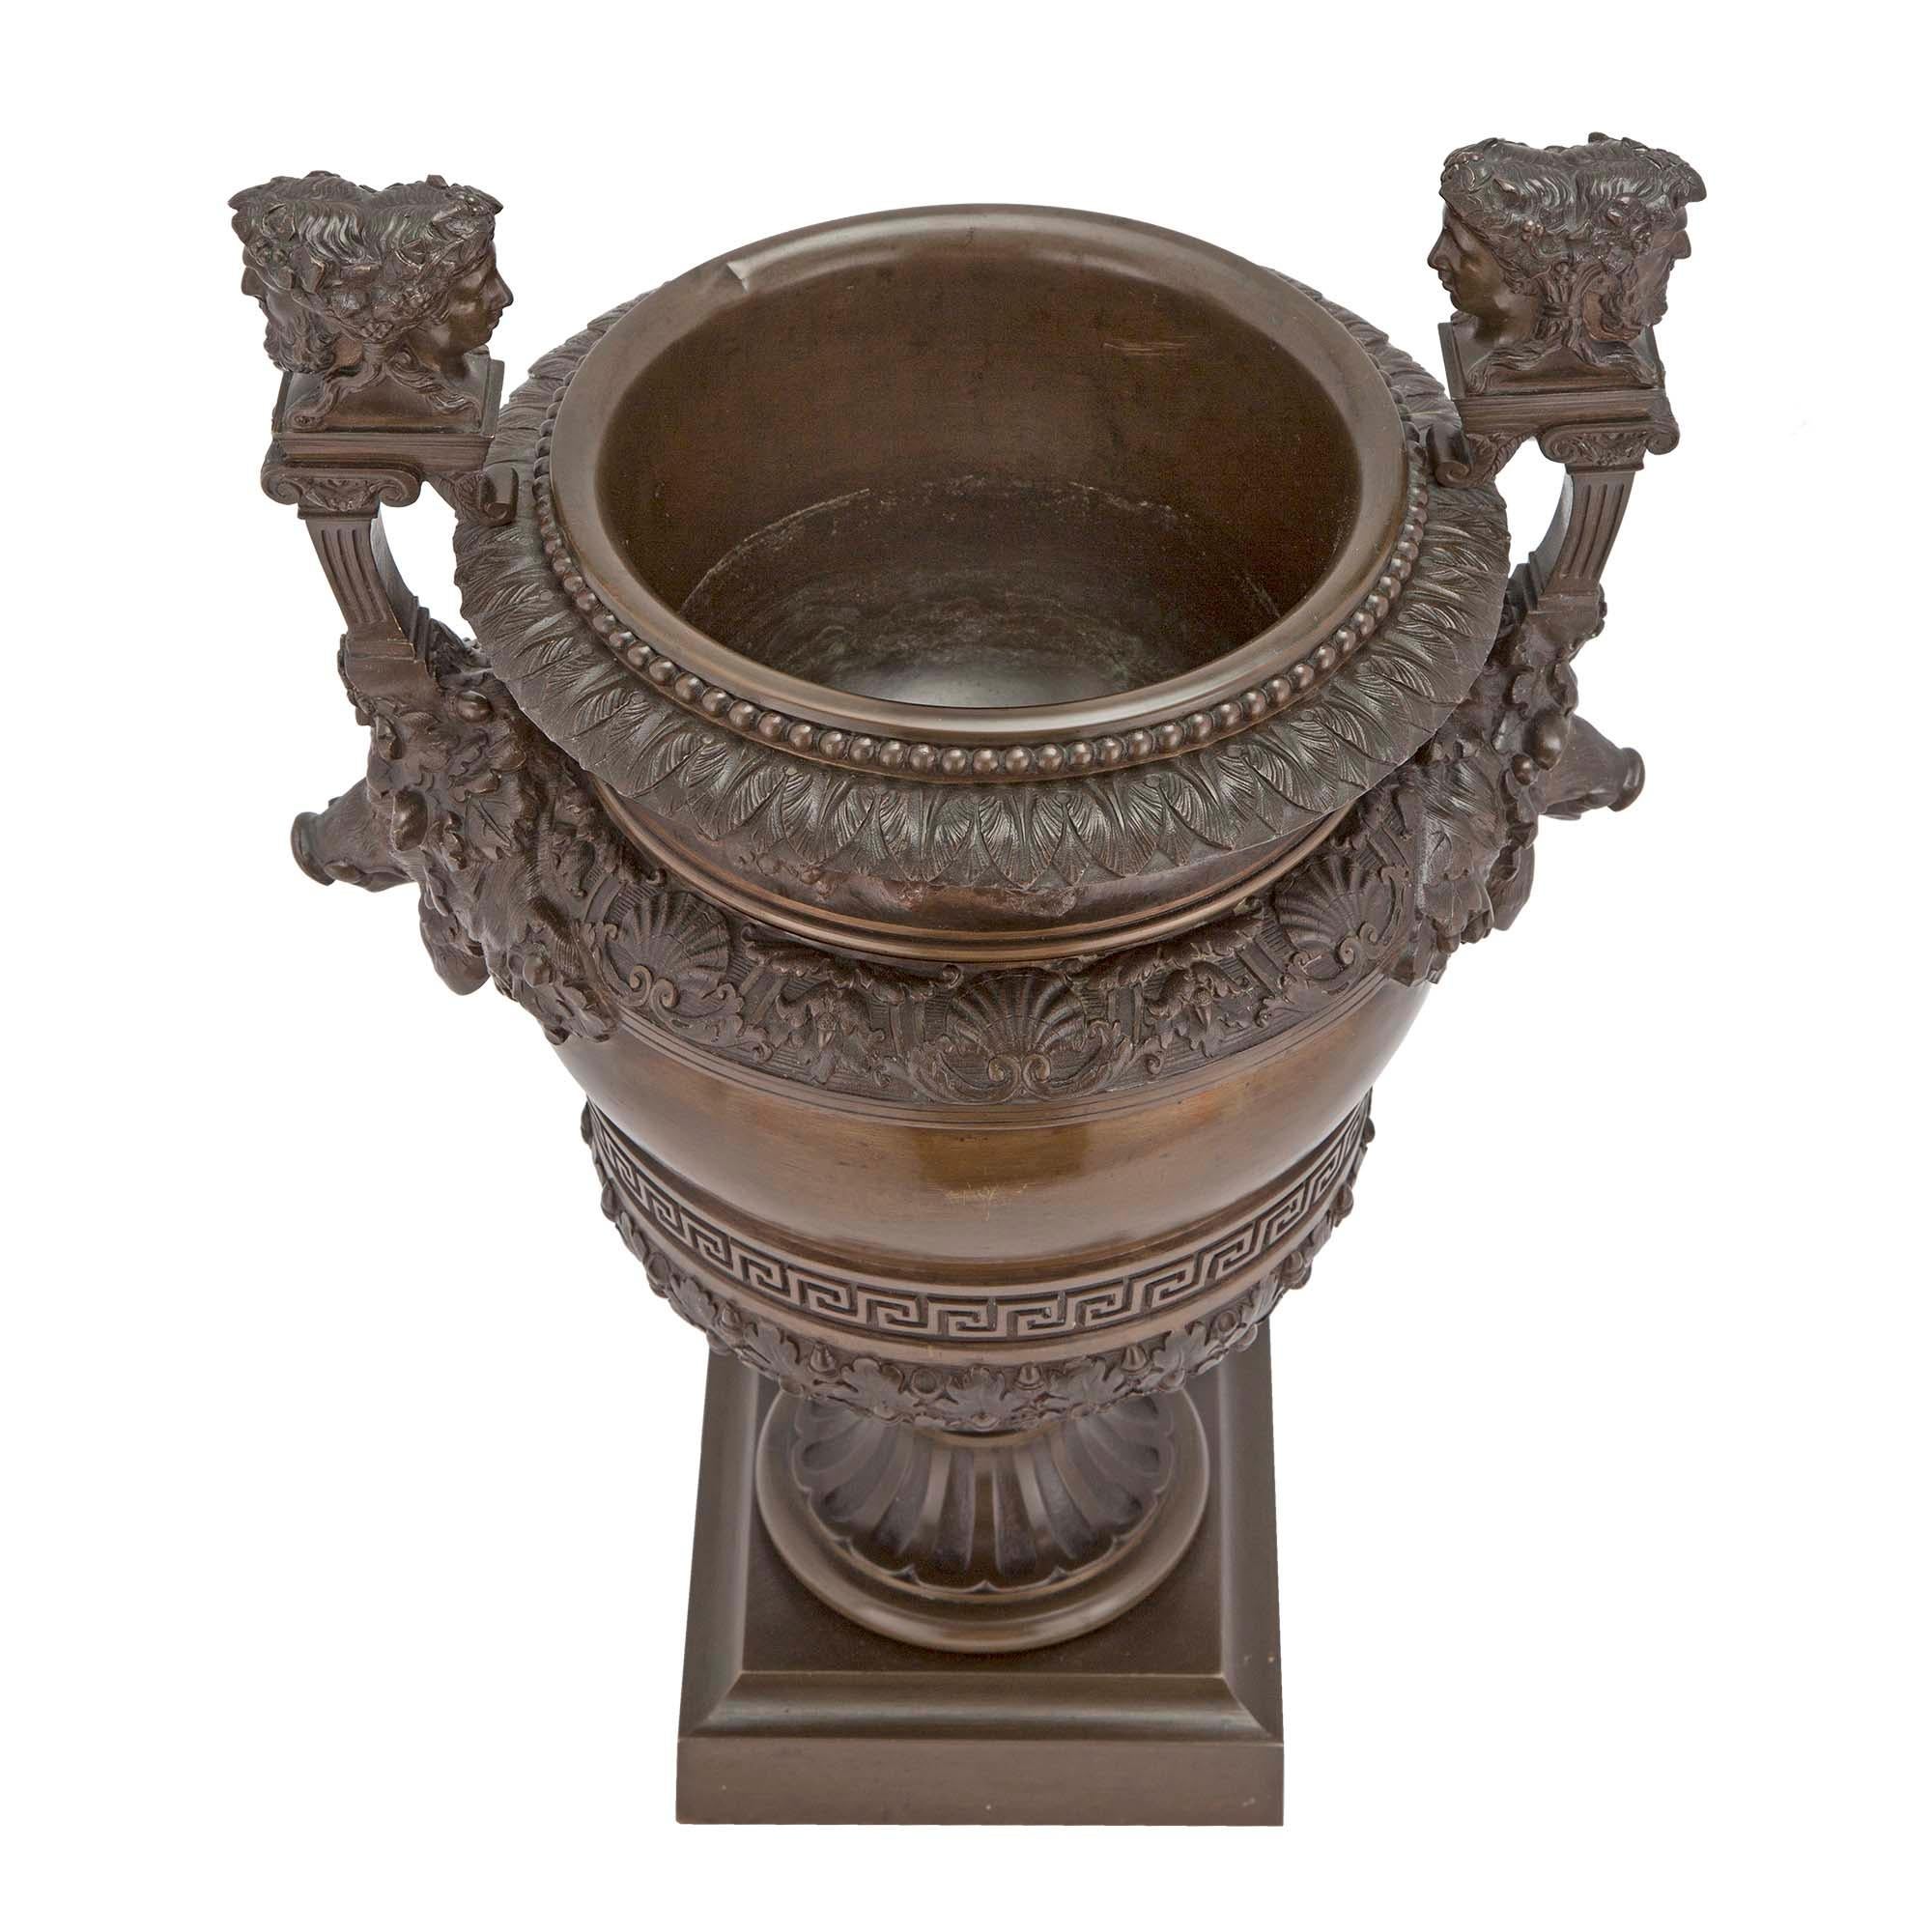 A handsome French 19th century Grand Tour period patinated bronze urn. The urn is raised by a mottled square base below the fluted socle pedestal. The body is decorated with richly chased foliate patterns and a striking Greek key design. At each